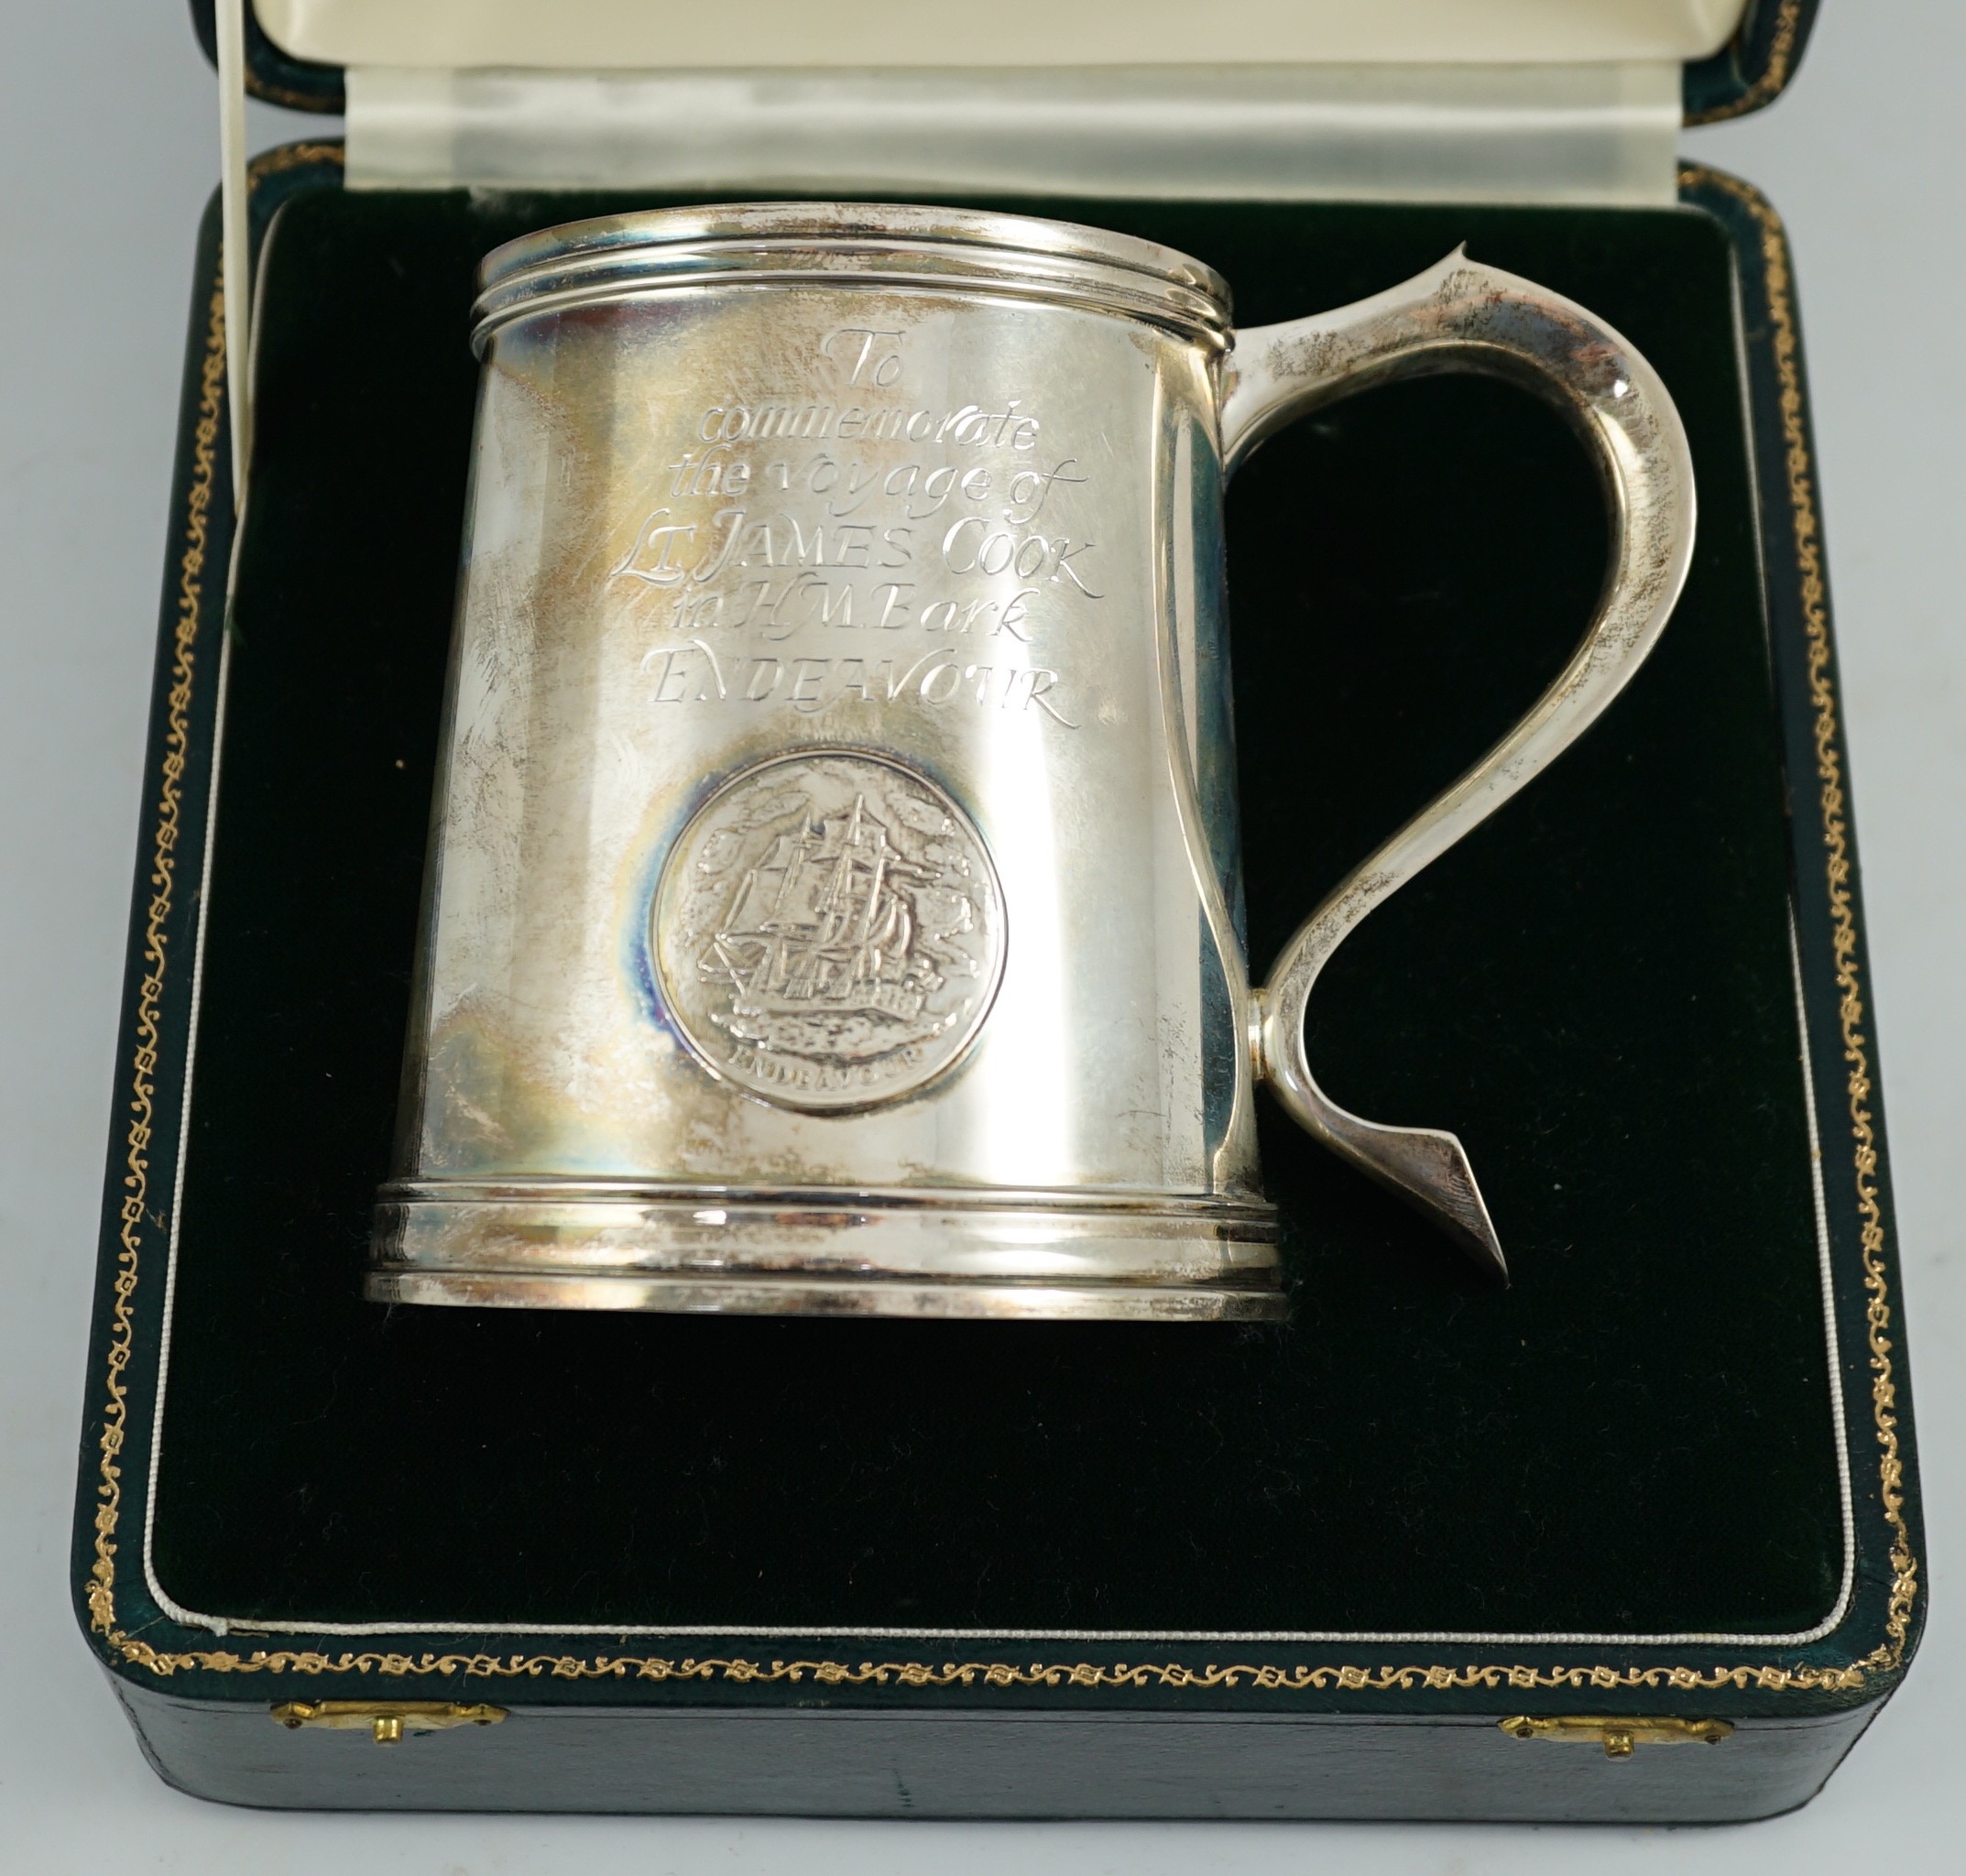 A cased Elizabeth II silver limited edition mug, engraved to commemorate the voyage of Lt. James Cook, in H.M. Bark Endeavour, to Australia